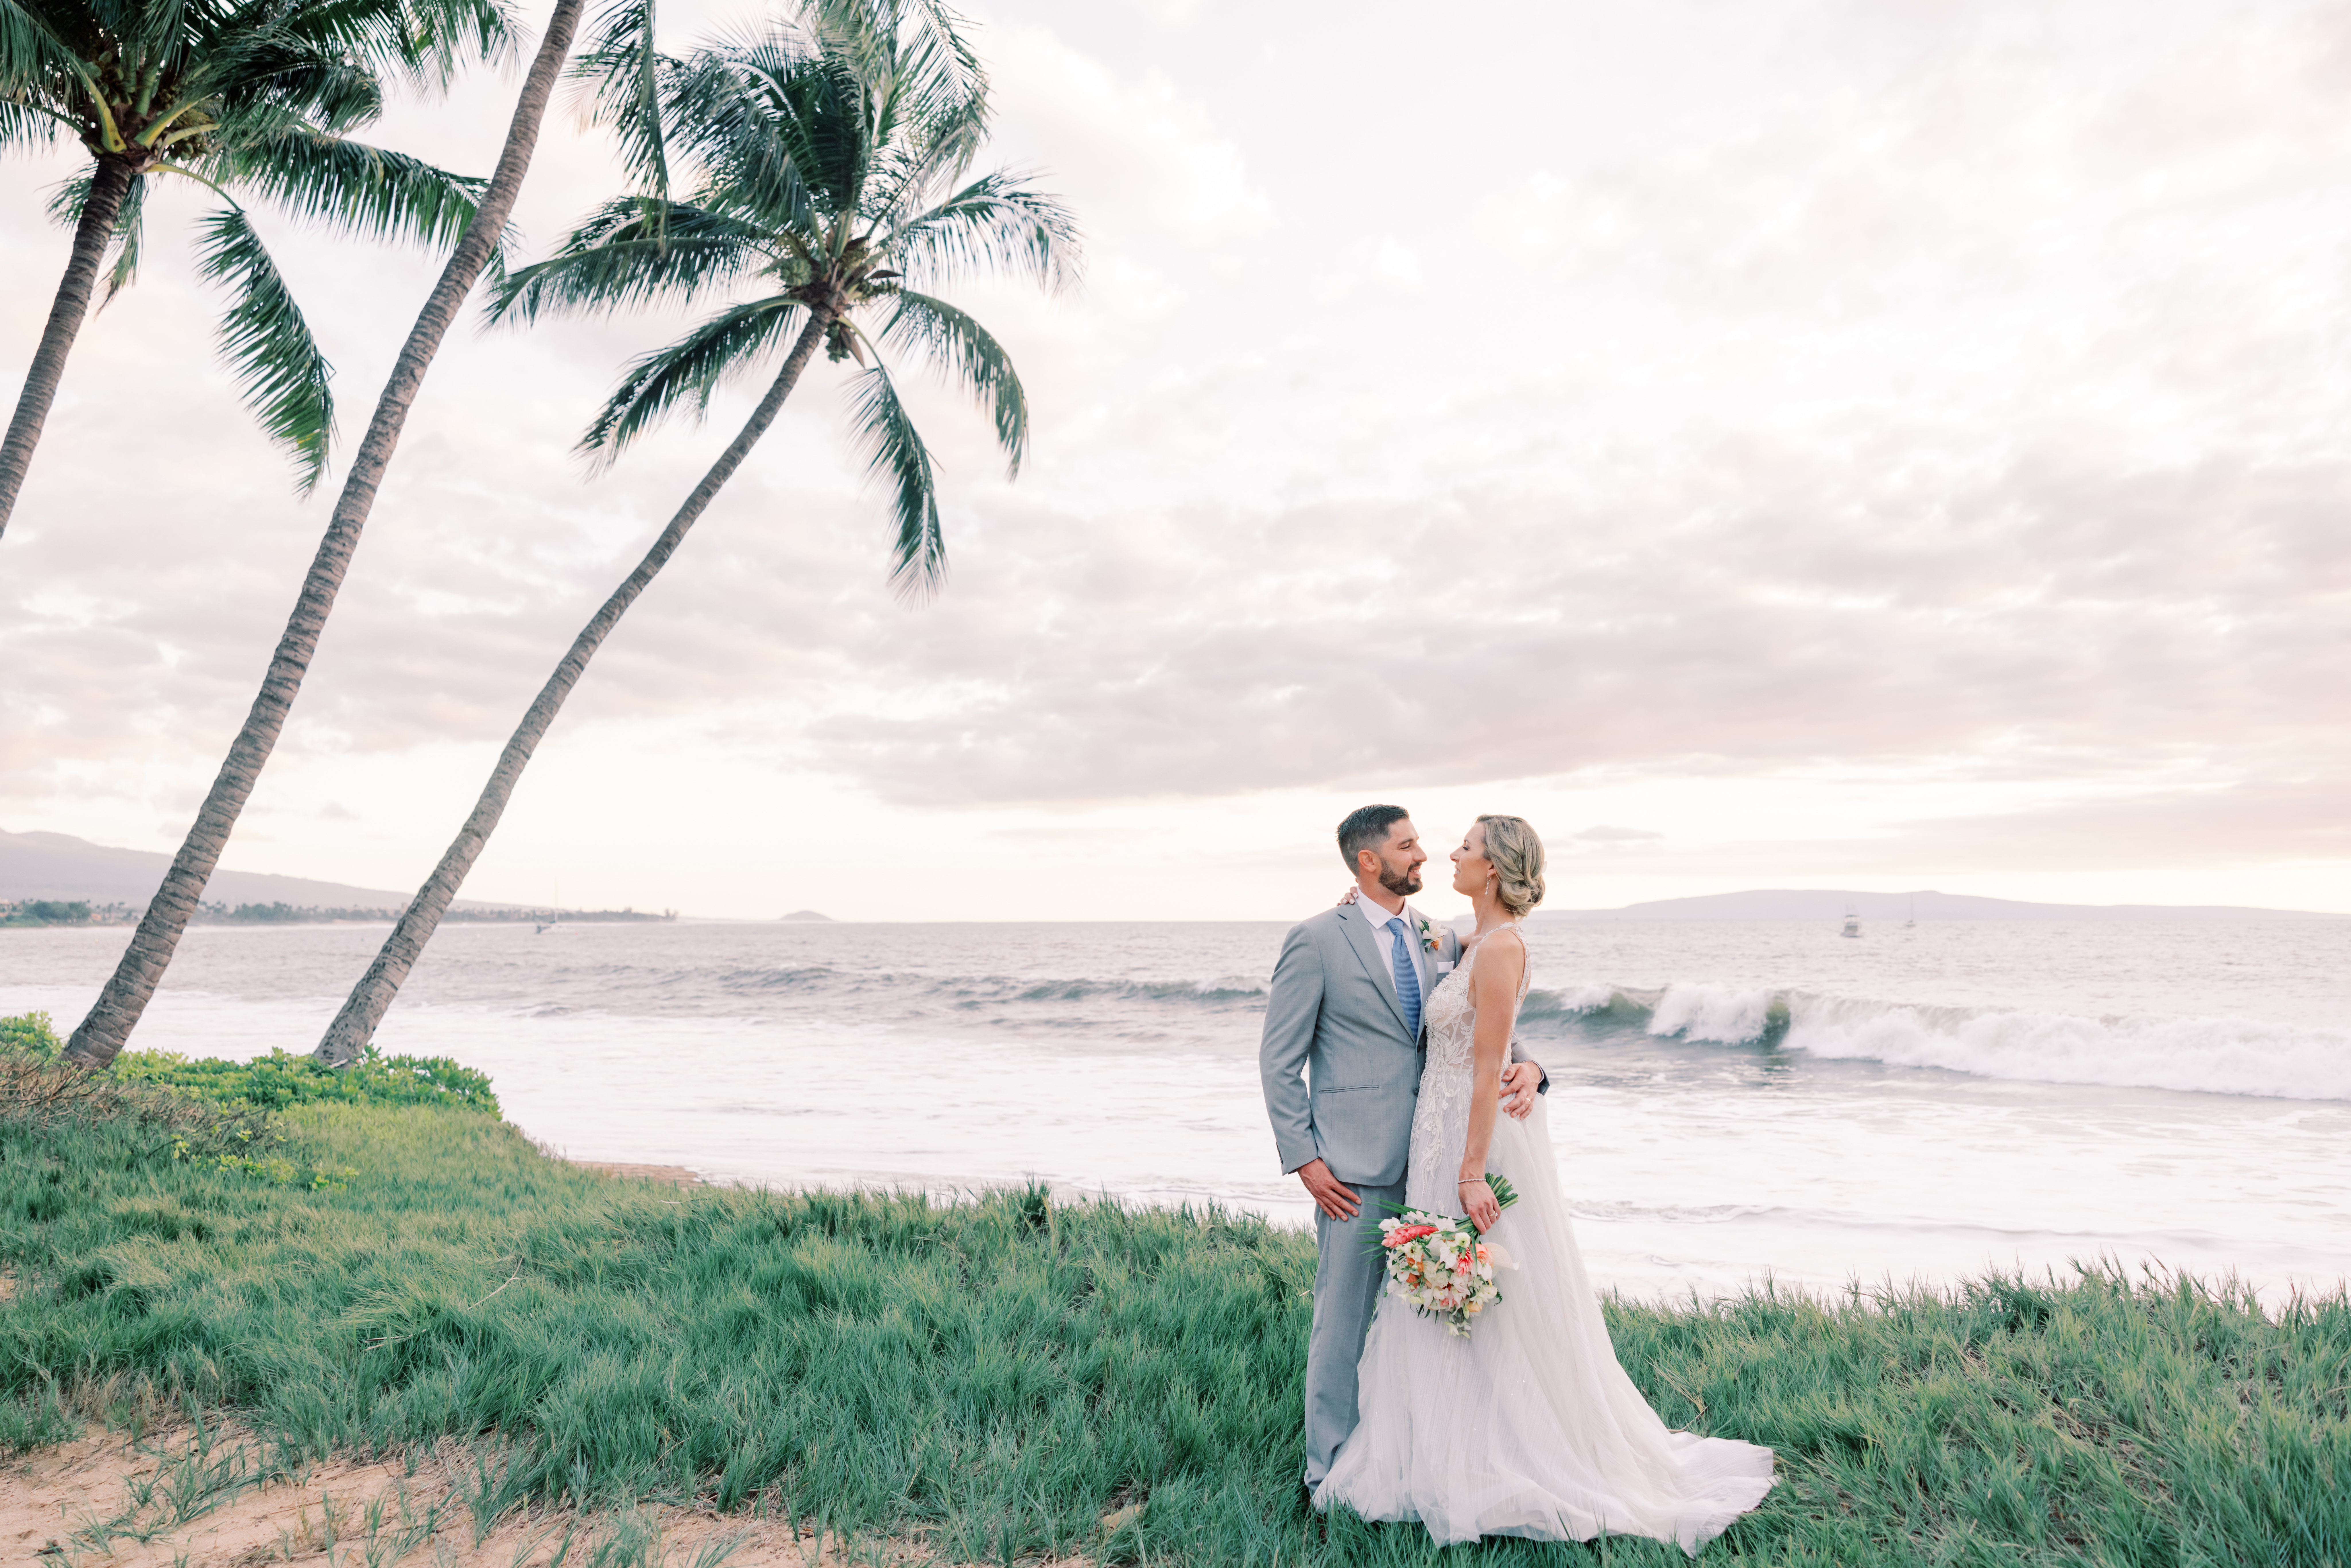 Groom and bride standing at a beach with palm trees and ocean waves in the background.